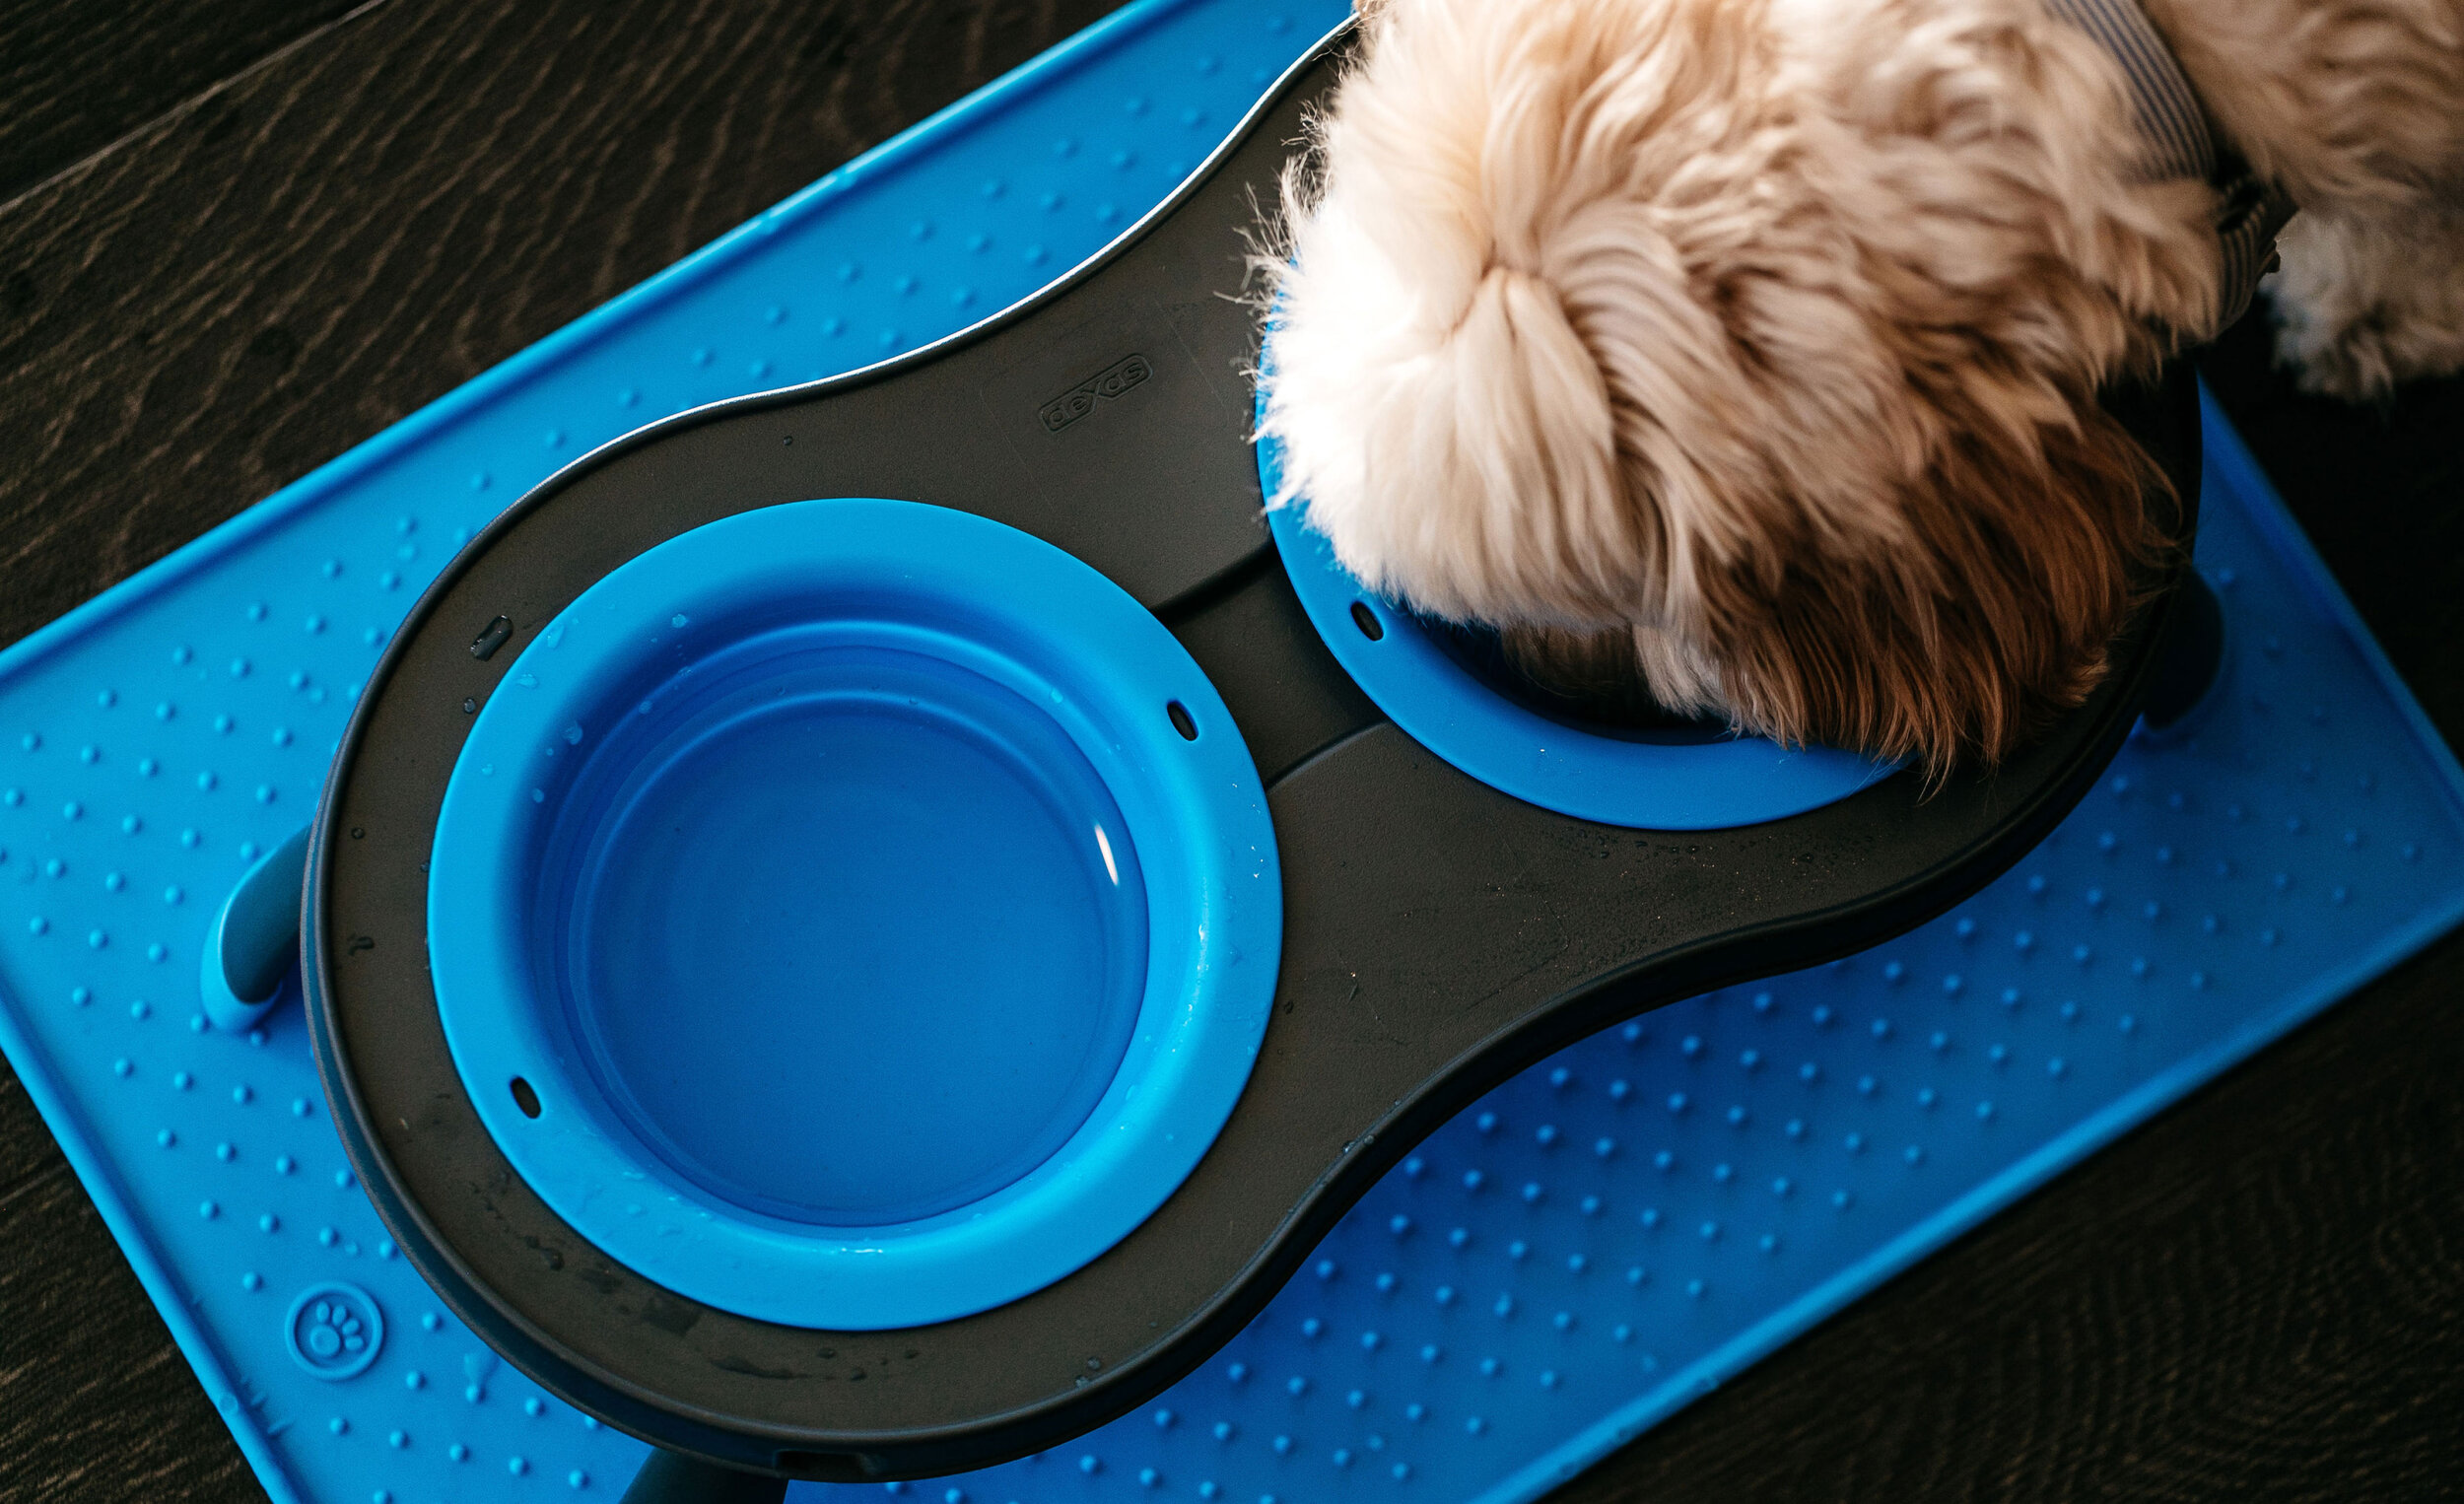 Dexas Popware for Pets Double Elevated Pet Feeder 